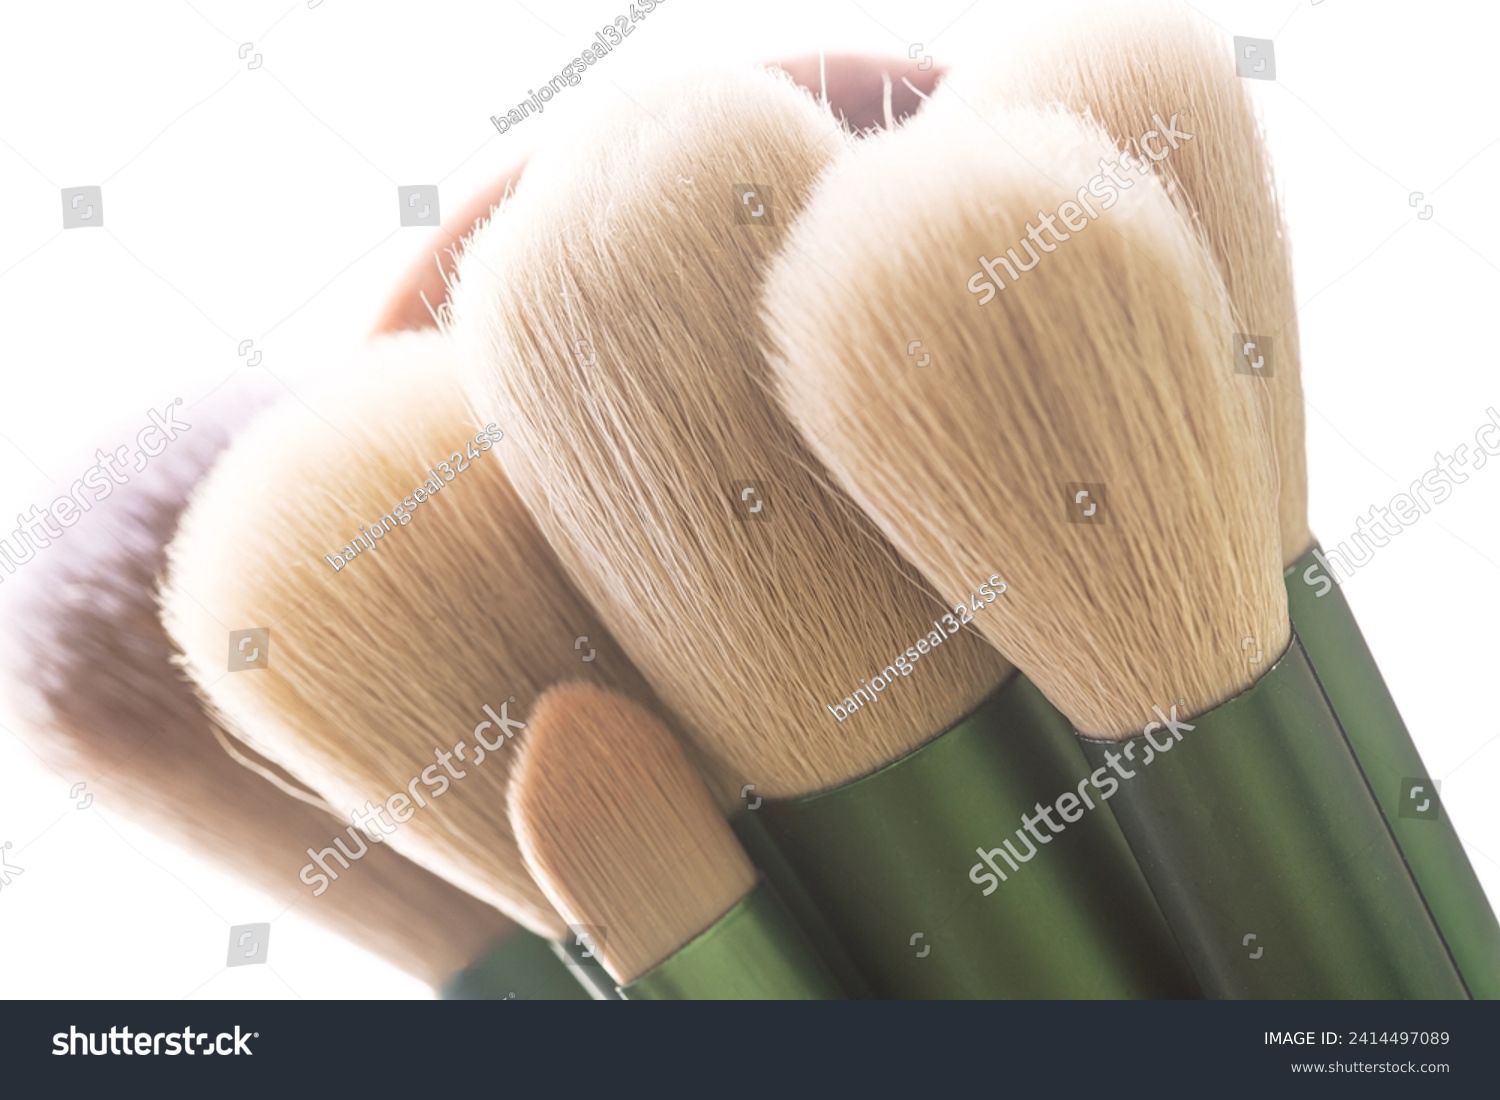 Macro bristles makeup brush,Brush tips in real-life color residue on bristles, isolated on white. #2414497089